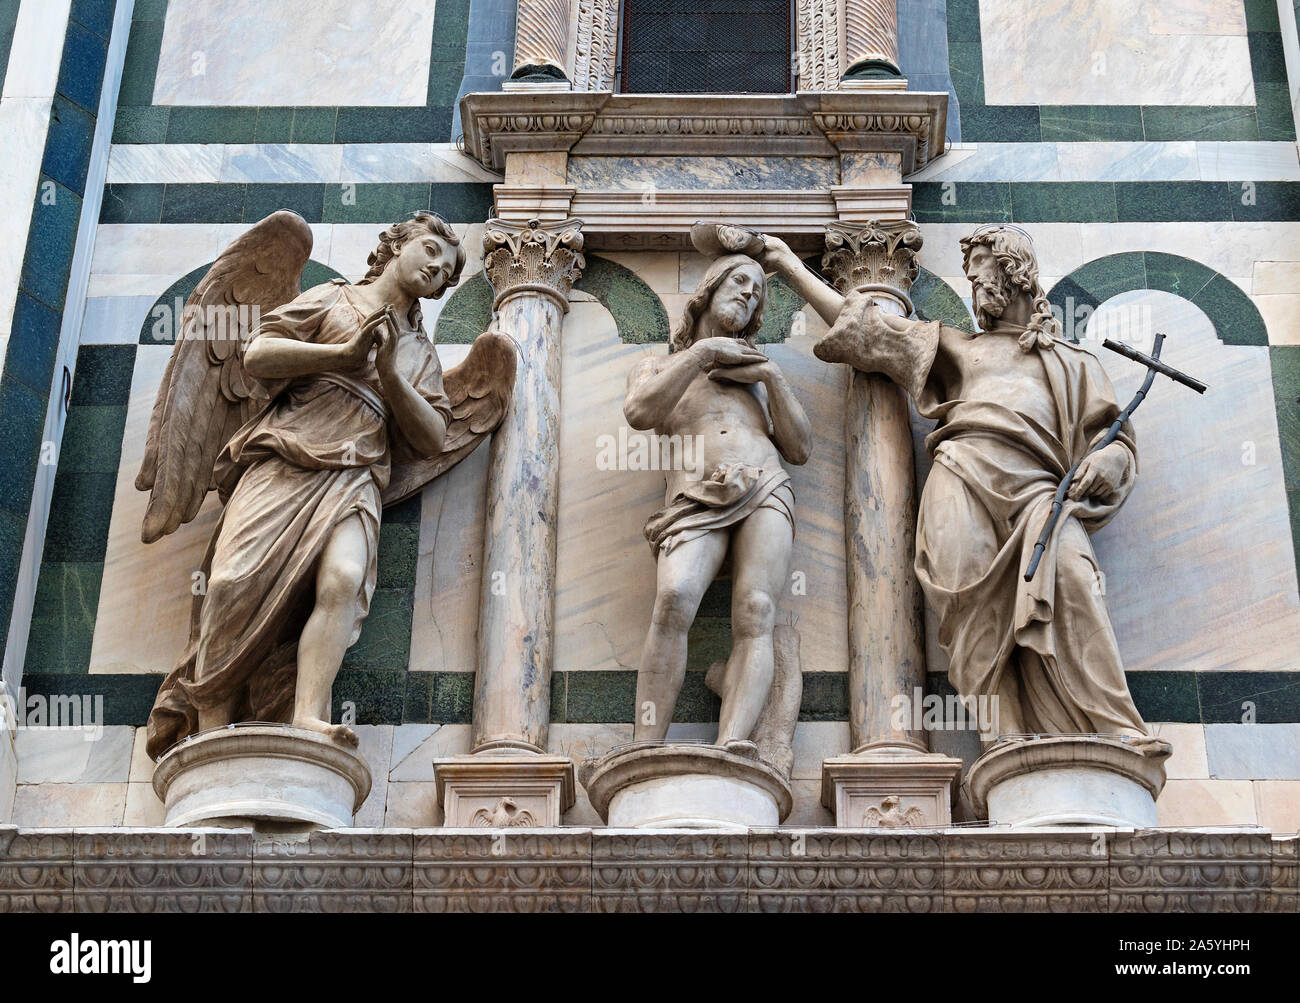 The baptism of christ sculpture by Andrea Sansovino on the baptistry at Santa Maria del Fiore, florence, italy Stock Photo